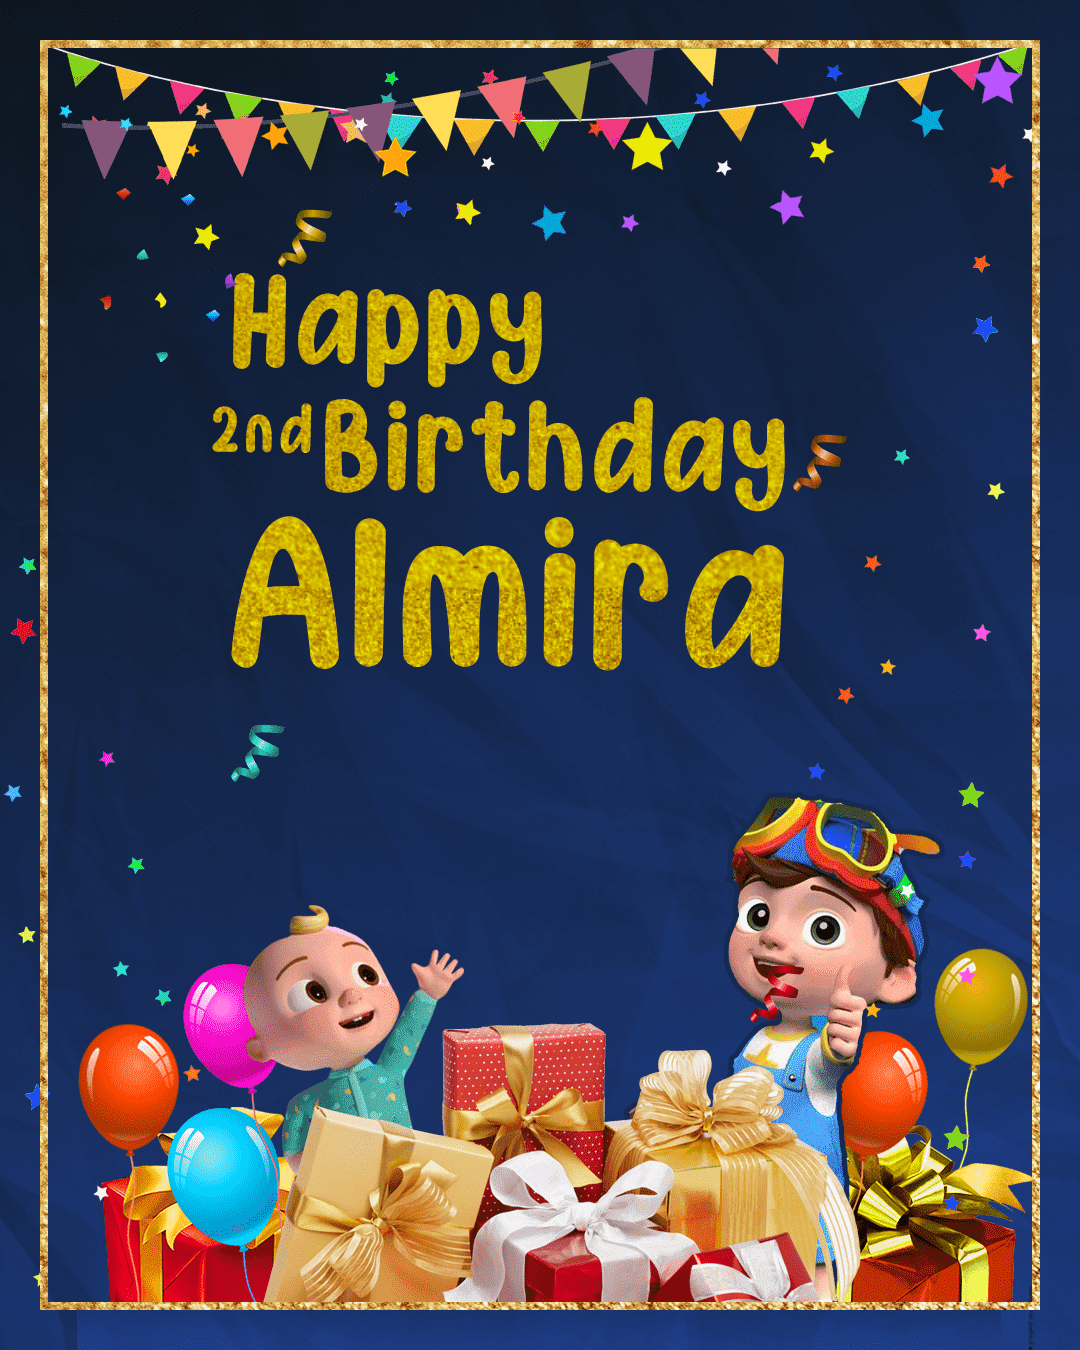 cocomelon golden birthday with almira.png